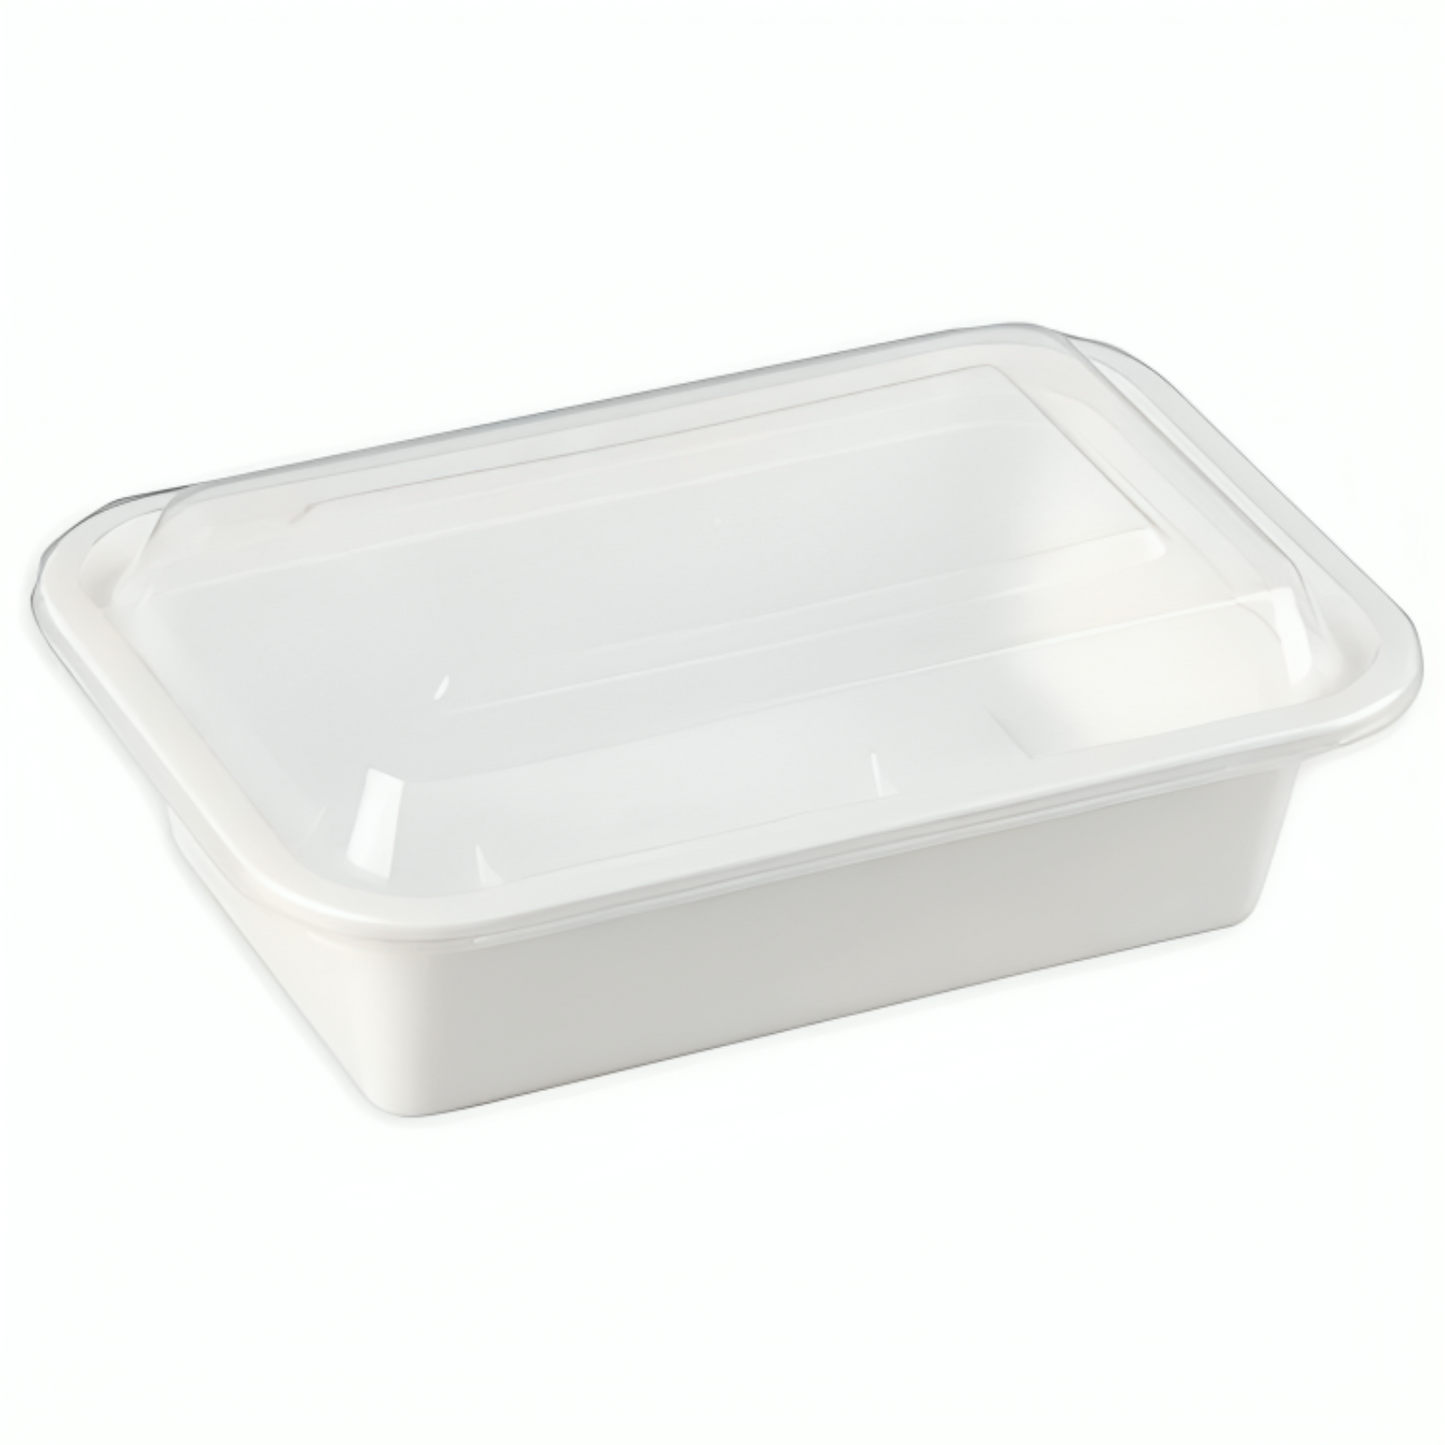 24oz Extra Strong Quality White Rectangular Meal Prep/ Bento Box Container Food Storage & Serving VeZee   